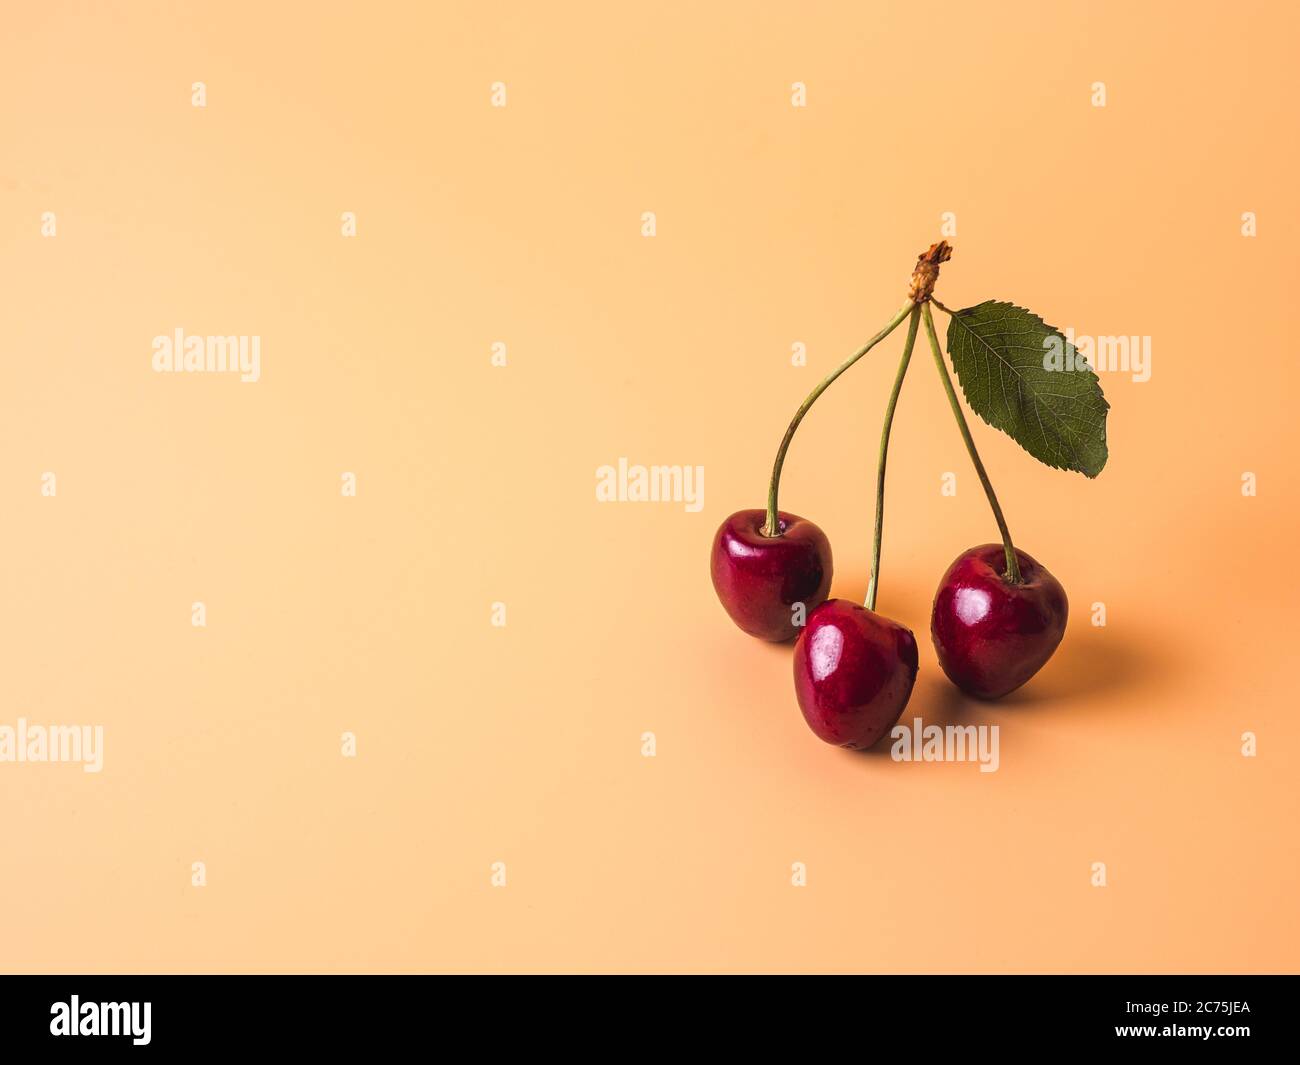 Cherry on yellow creamy background. Fresh ripe sweet cherry bunch with 3 berries and green leaf with copy space left. Horizontal. Healthy eating, veganism and summer concept Stock Photo